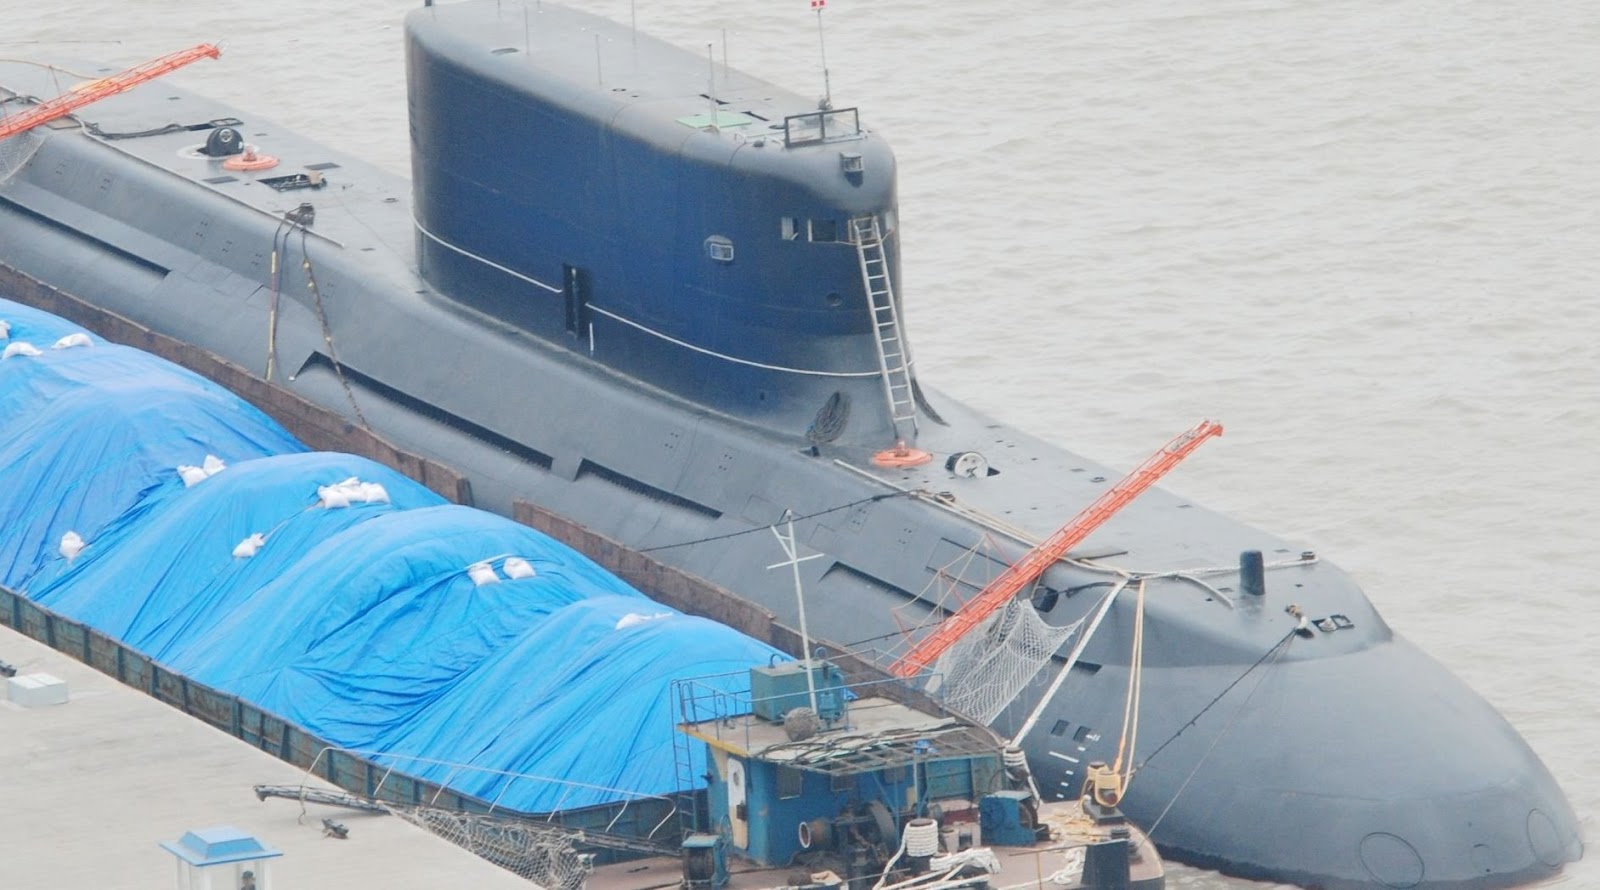 The Type-032 Qing-class submarine, a technology demonstrator and evaluation platform in use by the People's Liberation Army Navy (PLAN). 